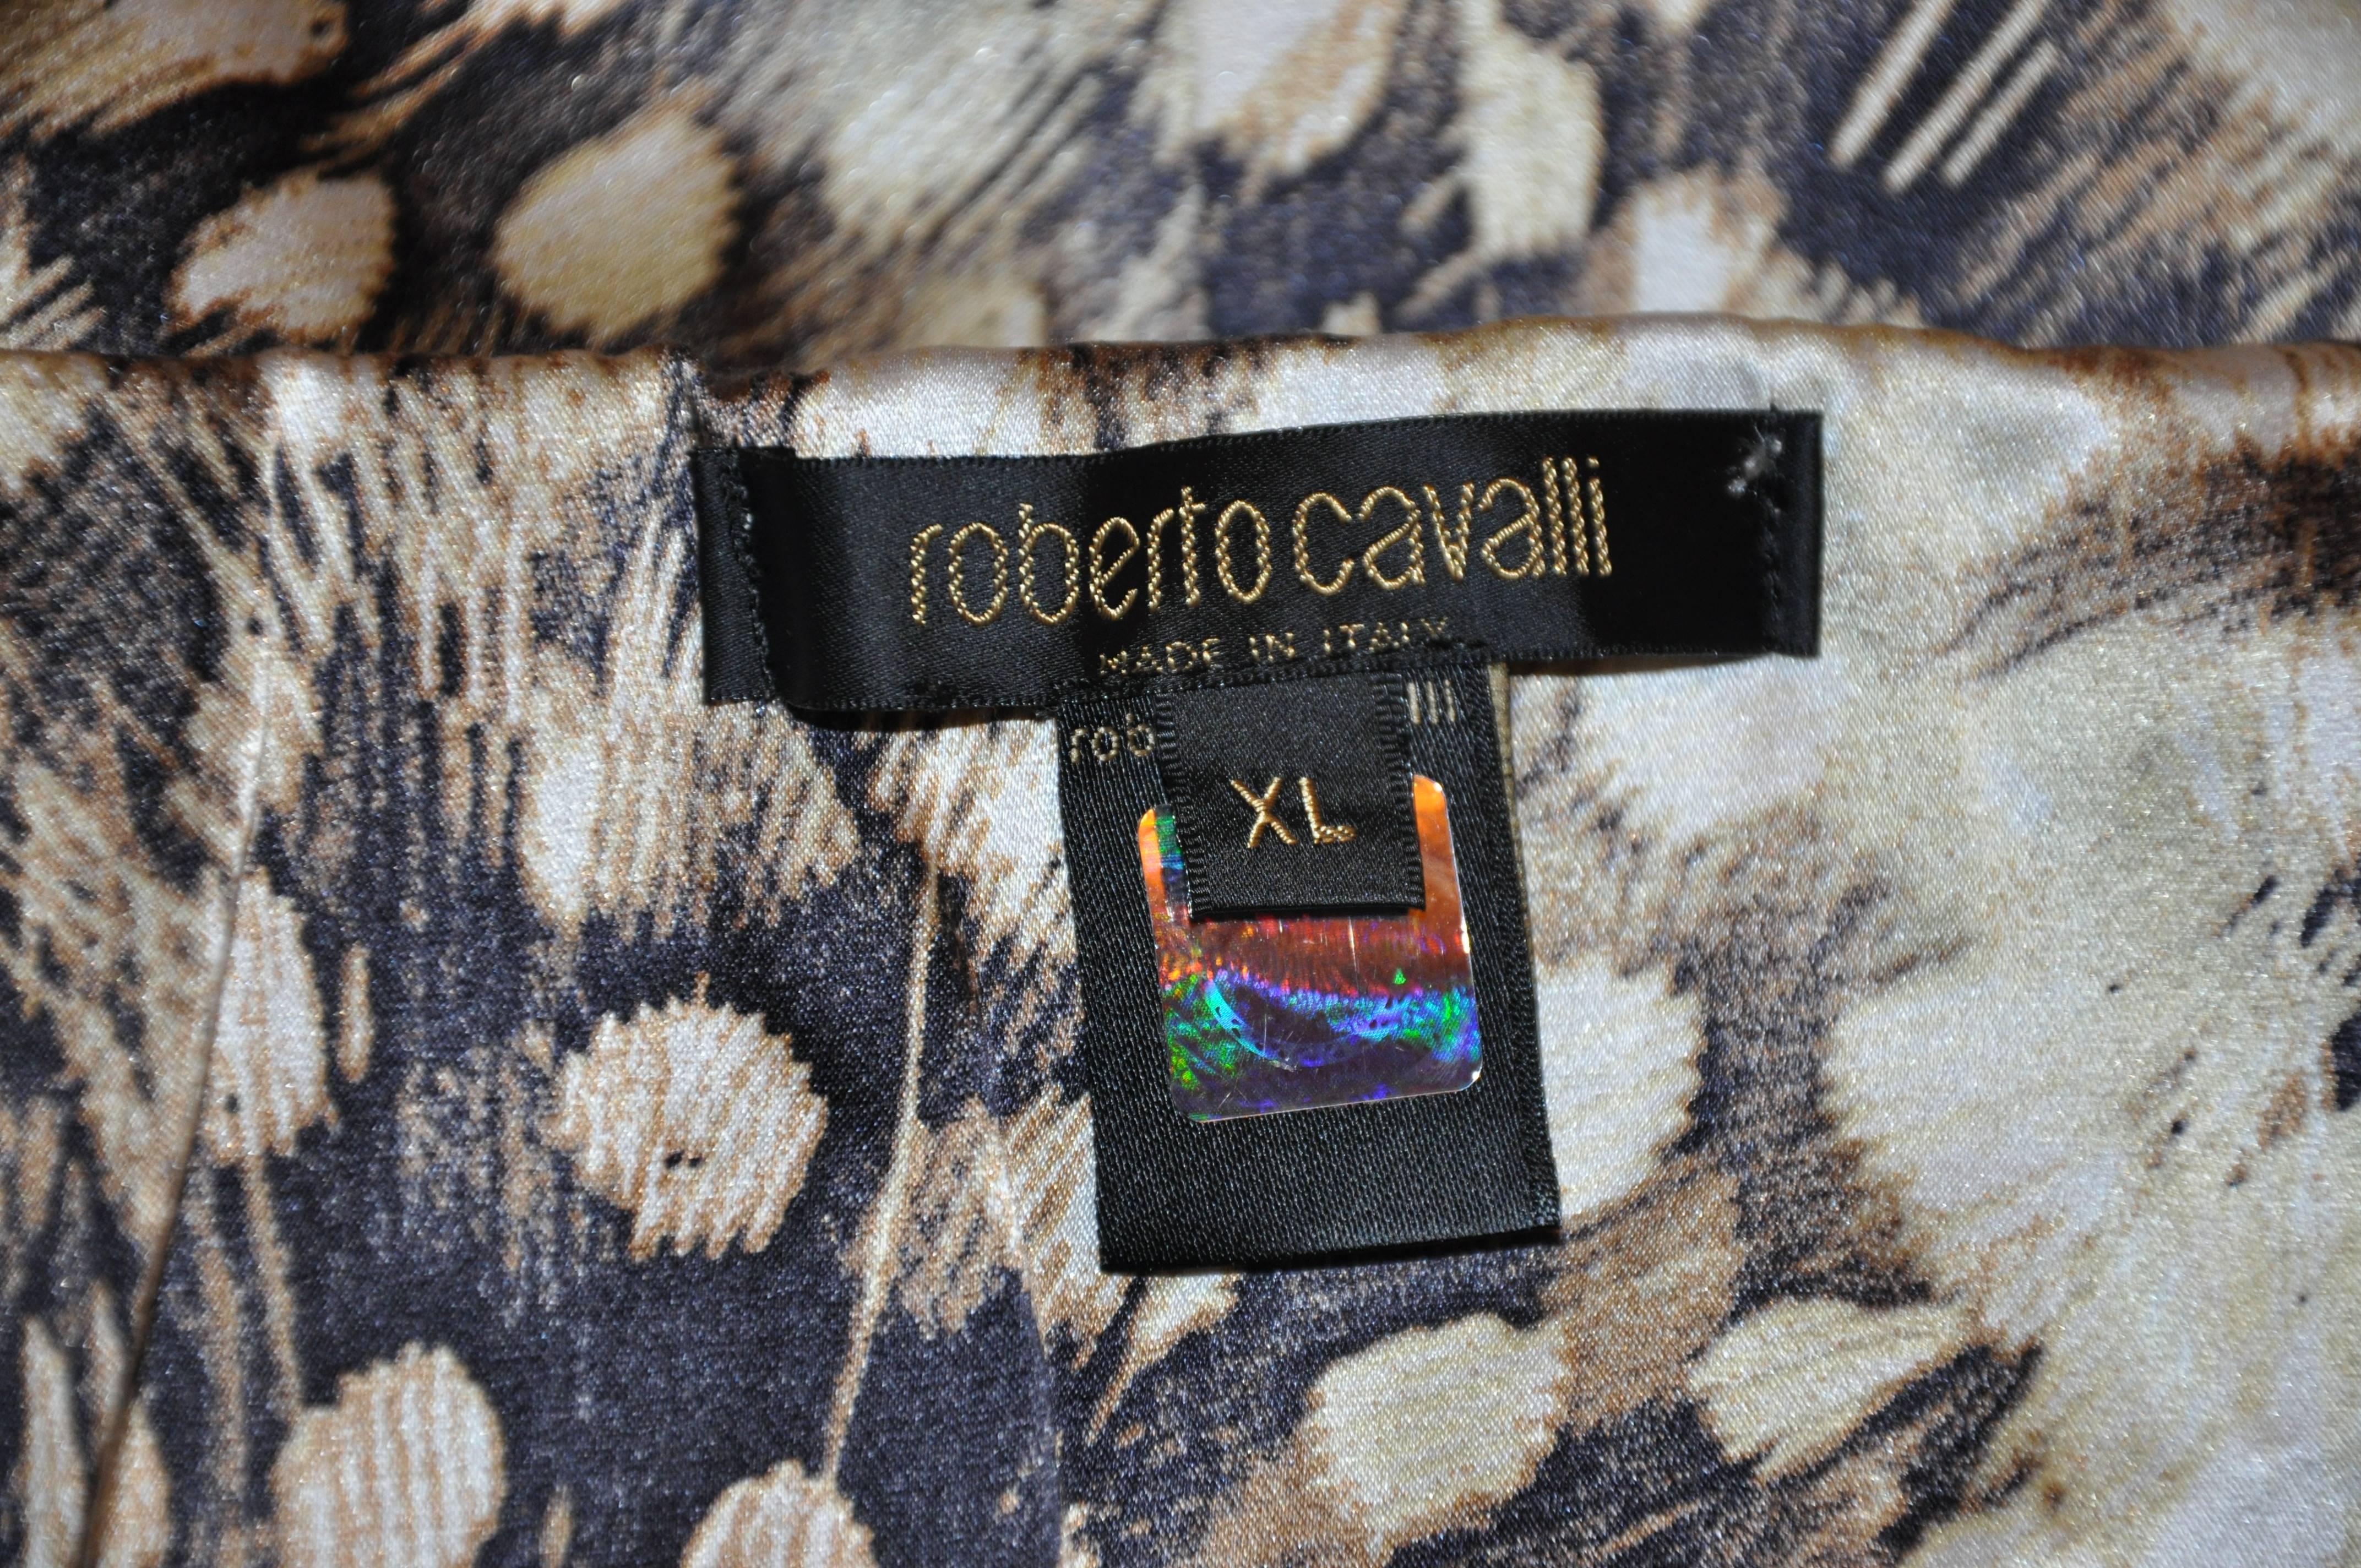 Roberto Cavalli Multi-Print Form-Fitting Silk Top In Good Condition For Sale In New York, NY